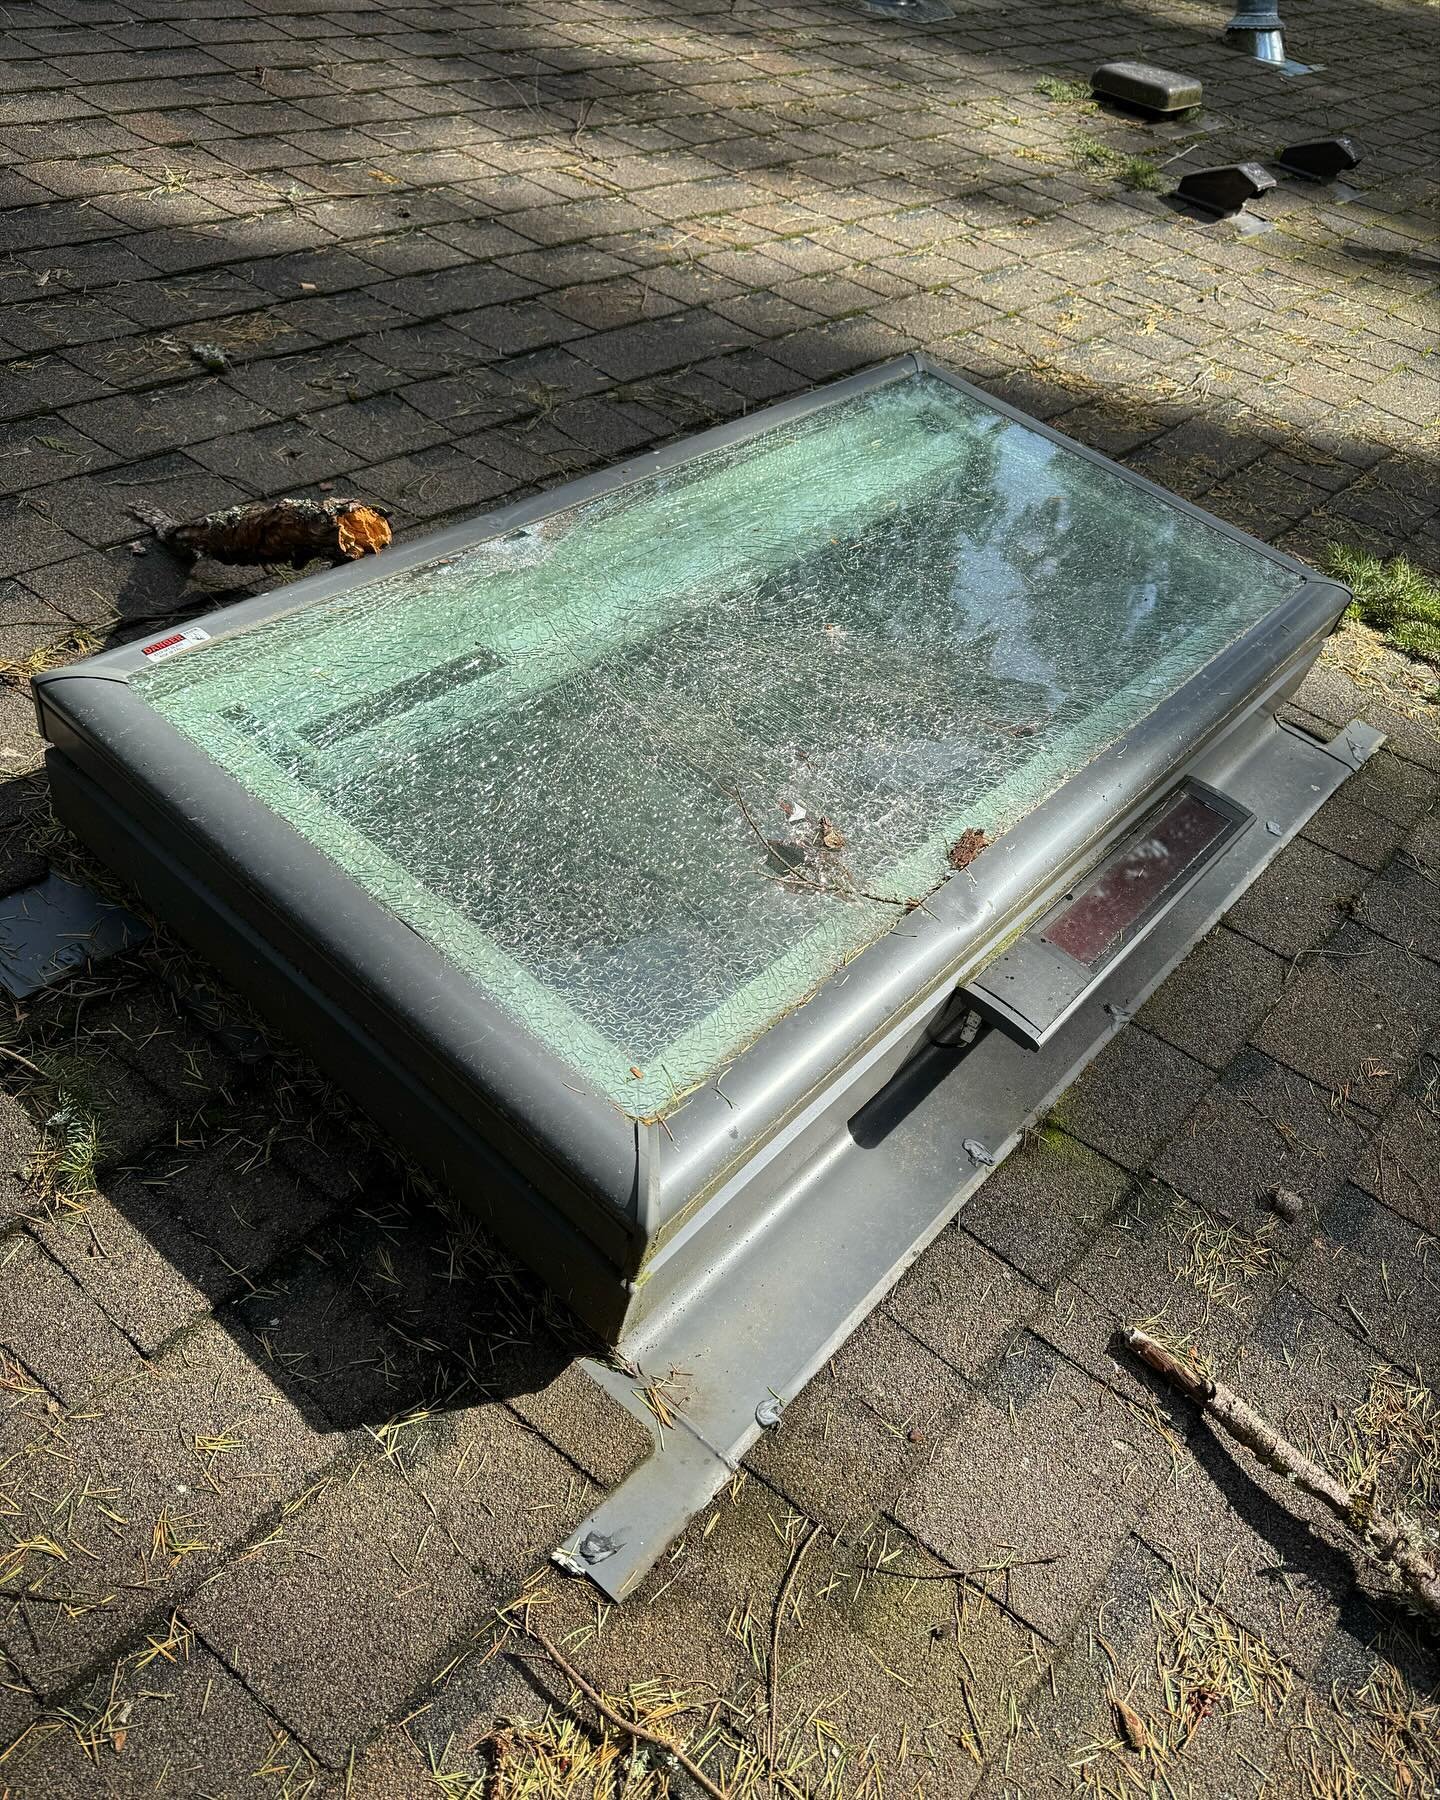 We finally got the electrical issues from January&rsquo;s ice storm sorted this week, and then this happened during Saturday&rsquo;s wind storm!

A tree limb landed on one of our skylights, completely shattering the glass. It certainly could have bee